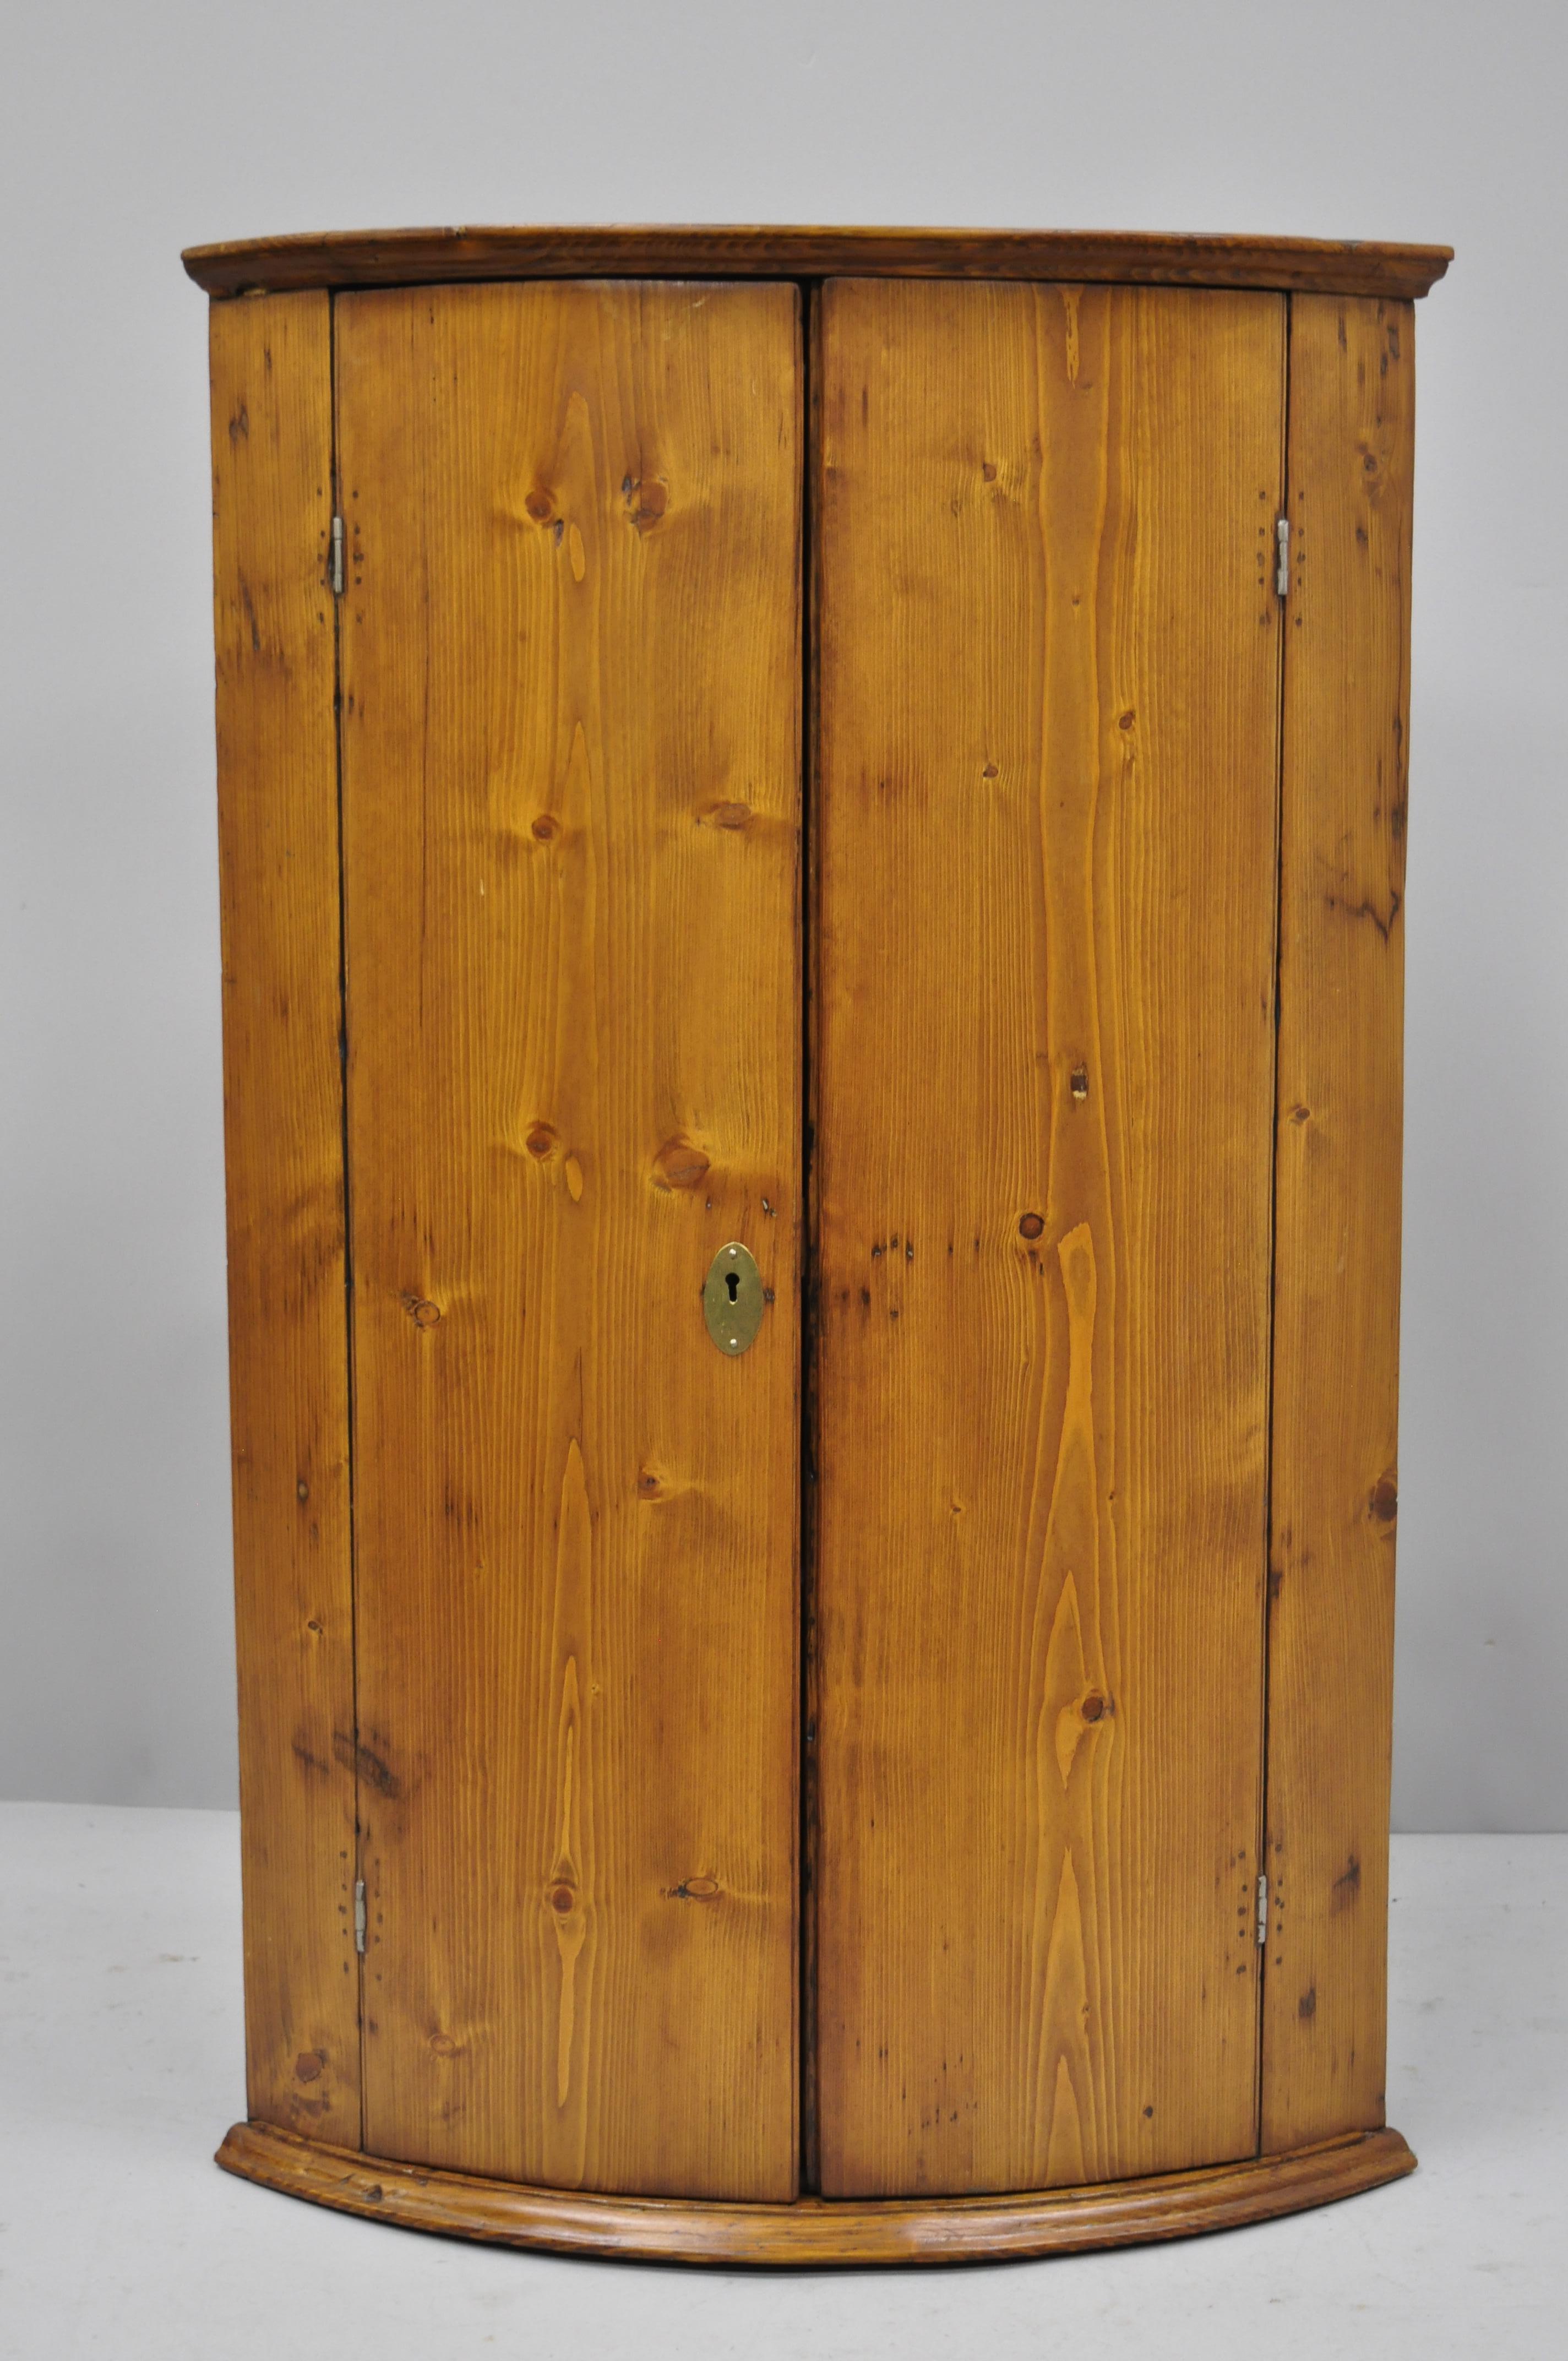 Antique pinewood wall hanging corner cabinet cupboard with blue painted interior. Item features blue painted interior, solid wood construction, beautiful wood grain, 2 swing doors, no key but unlocked, 2 wooden shelves, quality American